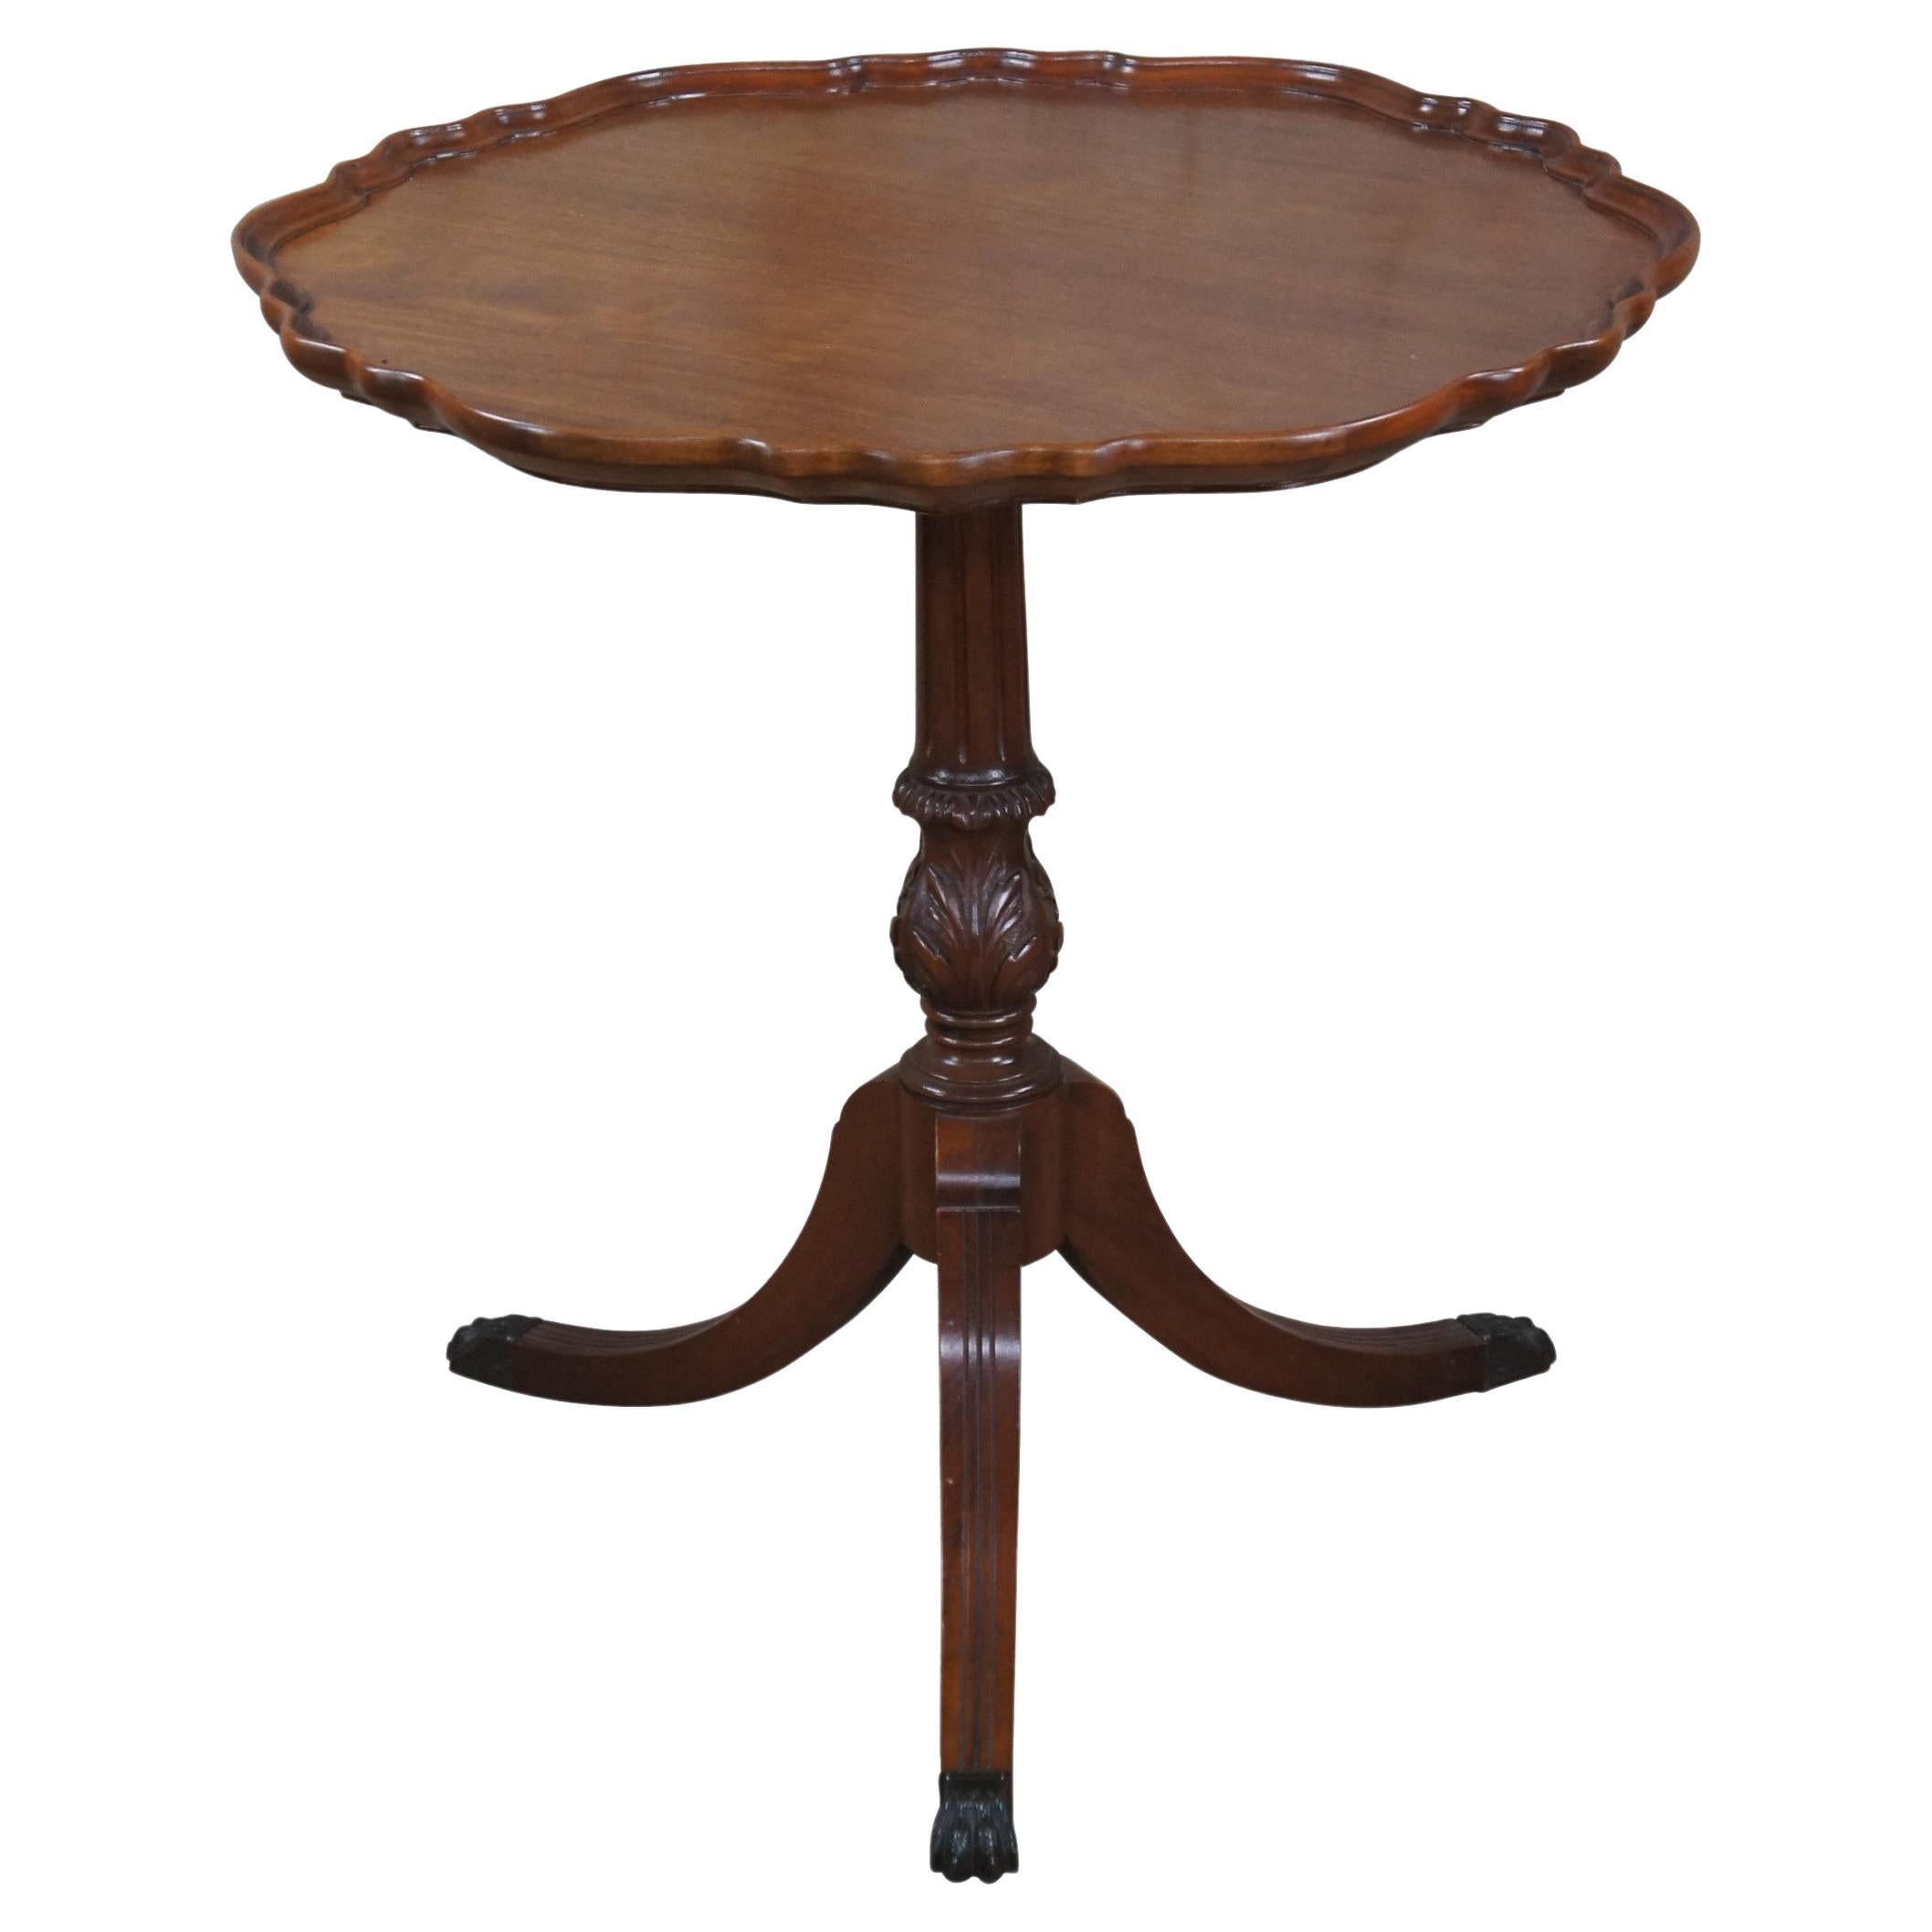 Antique Imperial Furniture Duncan Phyfe Mahogany Pie Crust Pedestal Table Stand